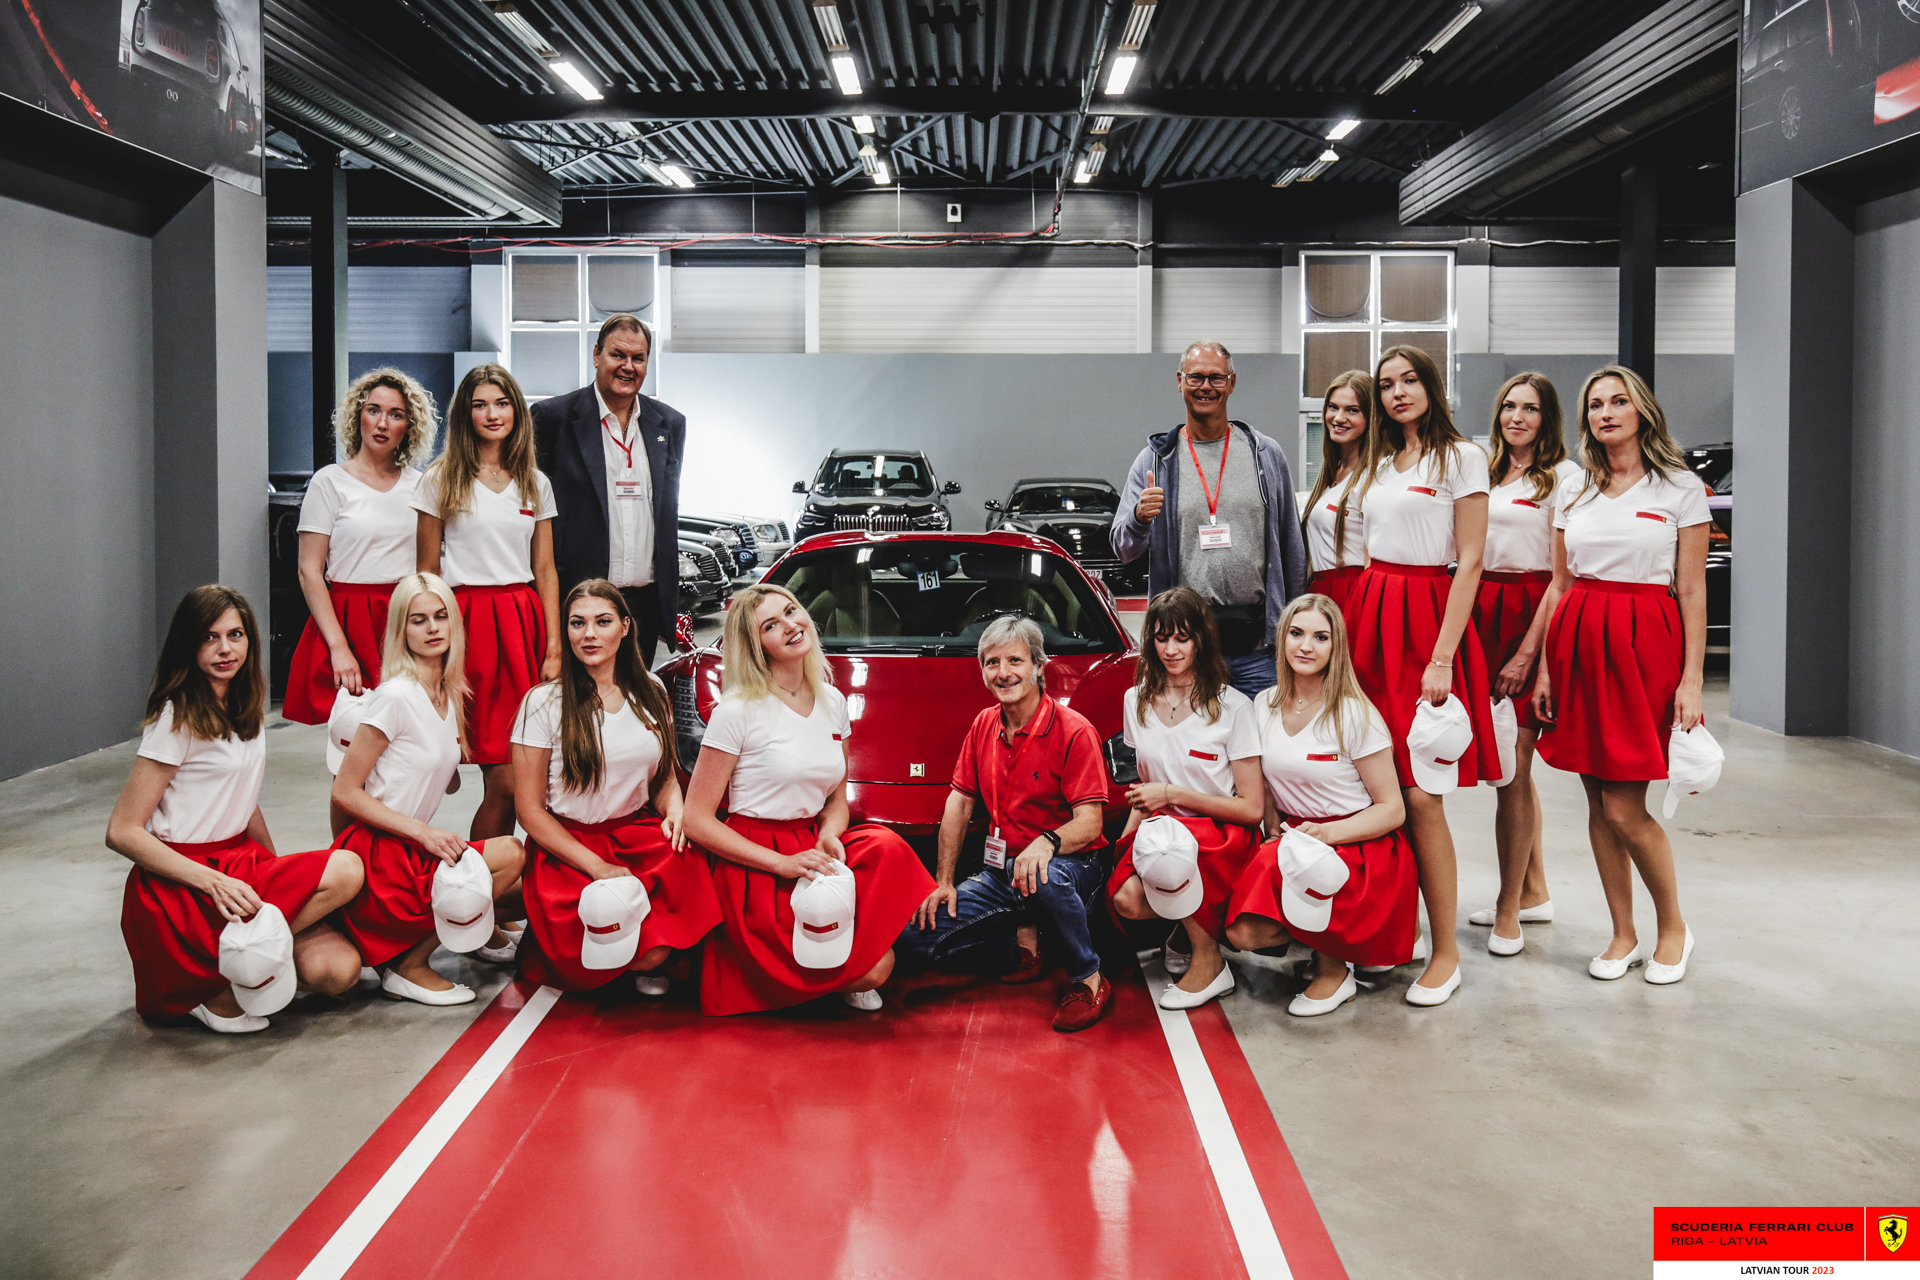 SFC Riga grid girls and part of the team at Stuttgart. 